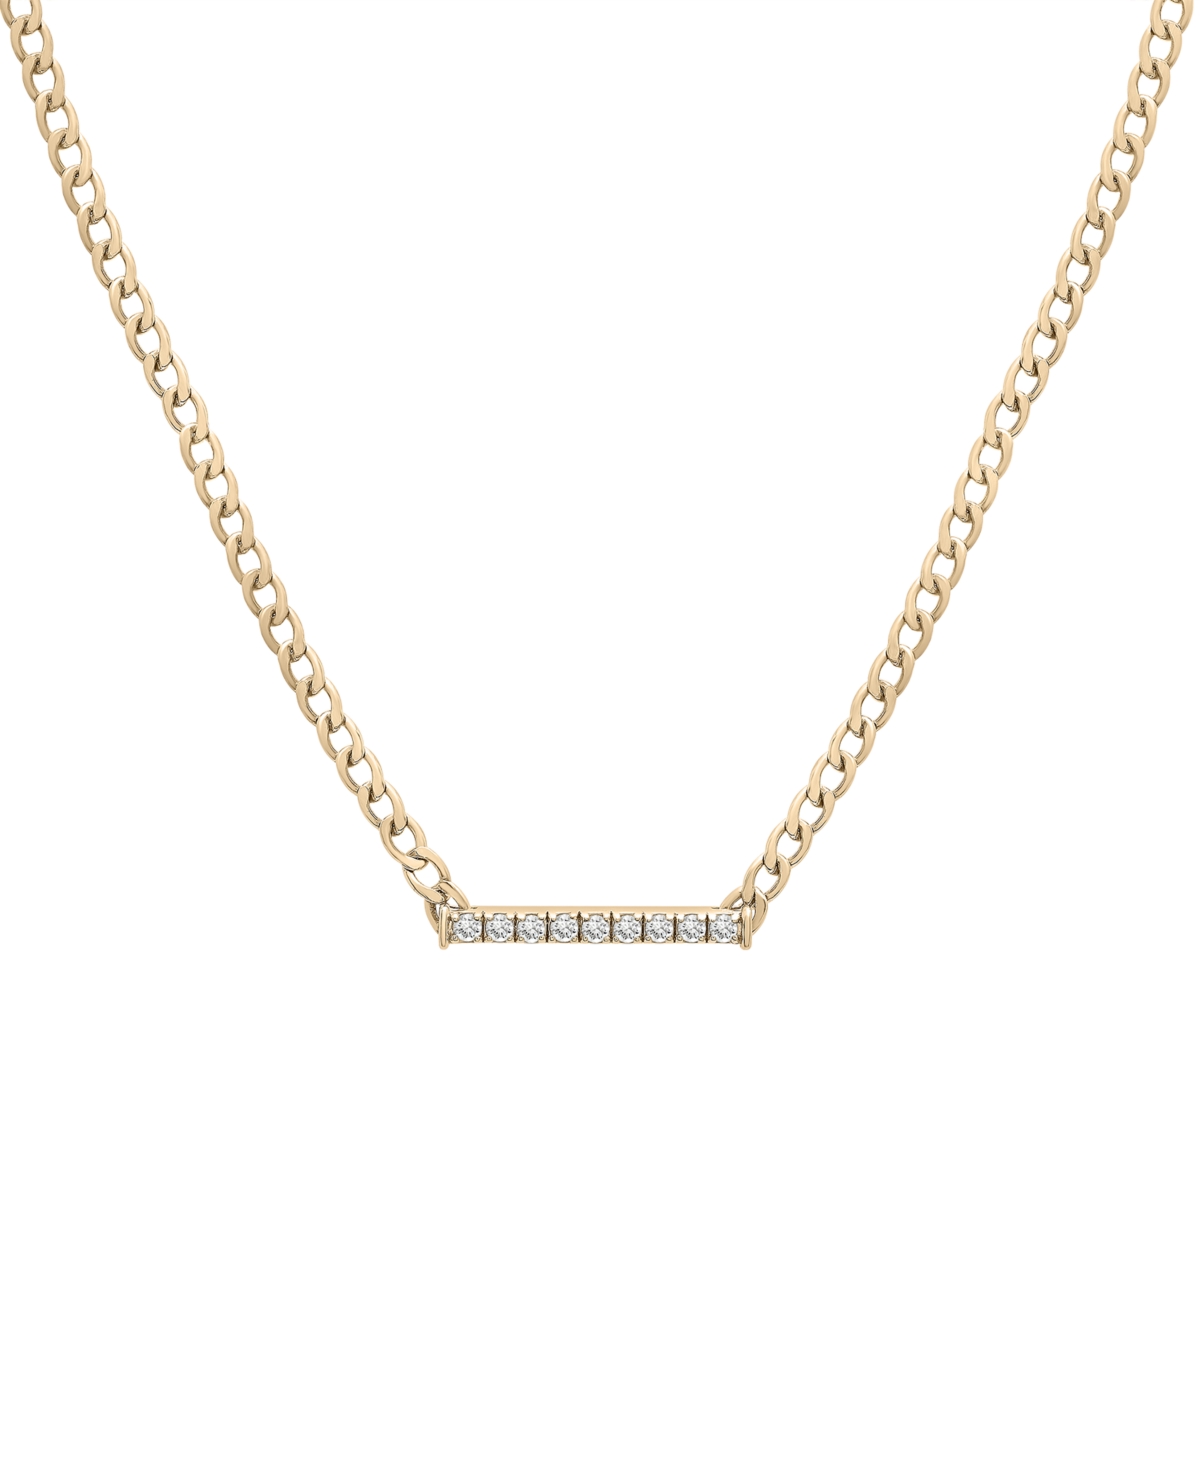 Diamond Bar 18" Pendant Necklace (1/6 ct. t.w.) in Gold Vermeil, Created for Macy's - Gold Vermeil